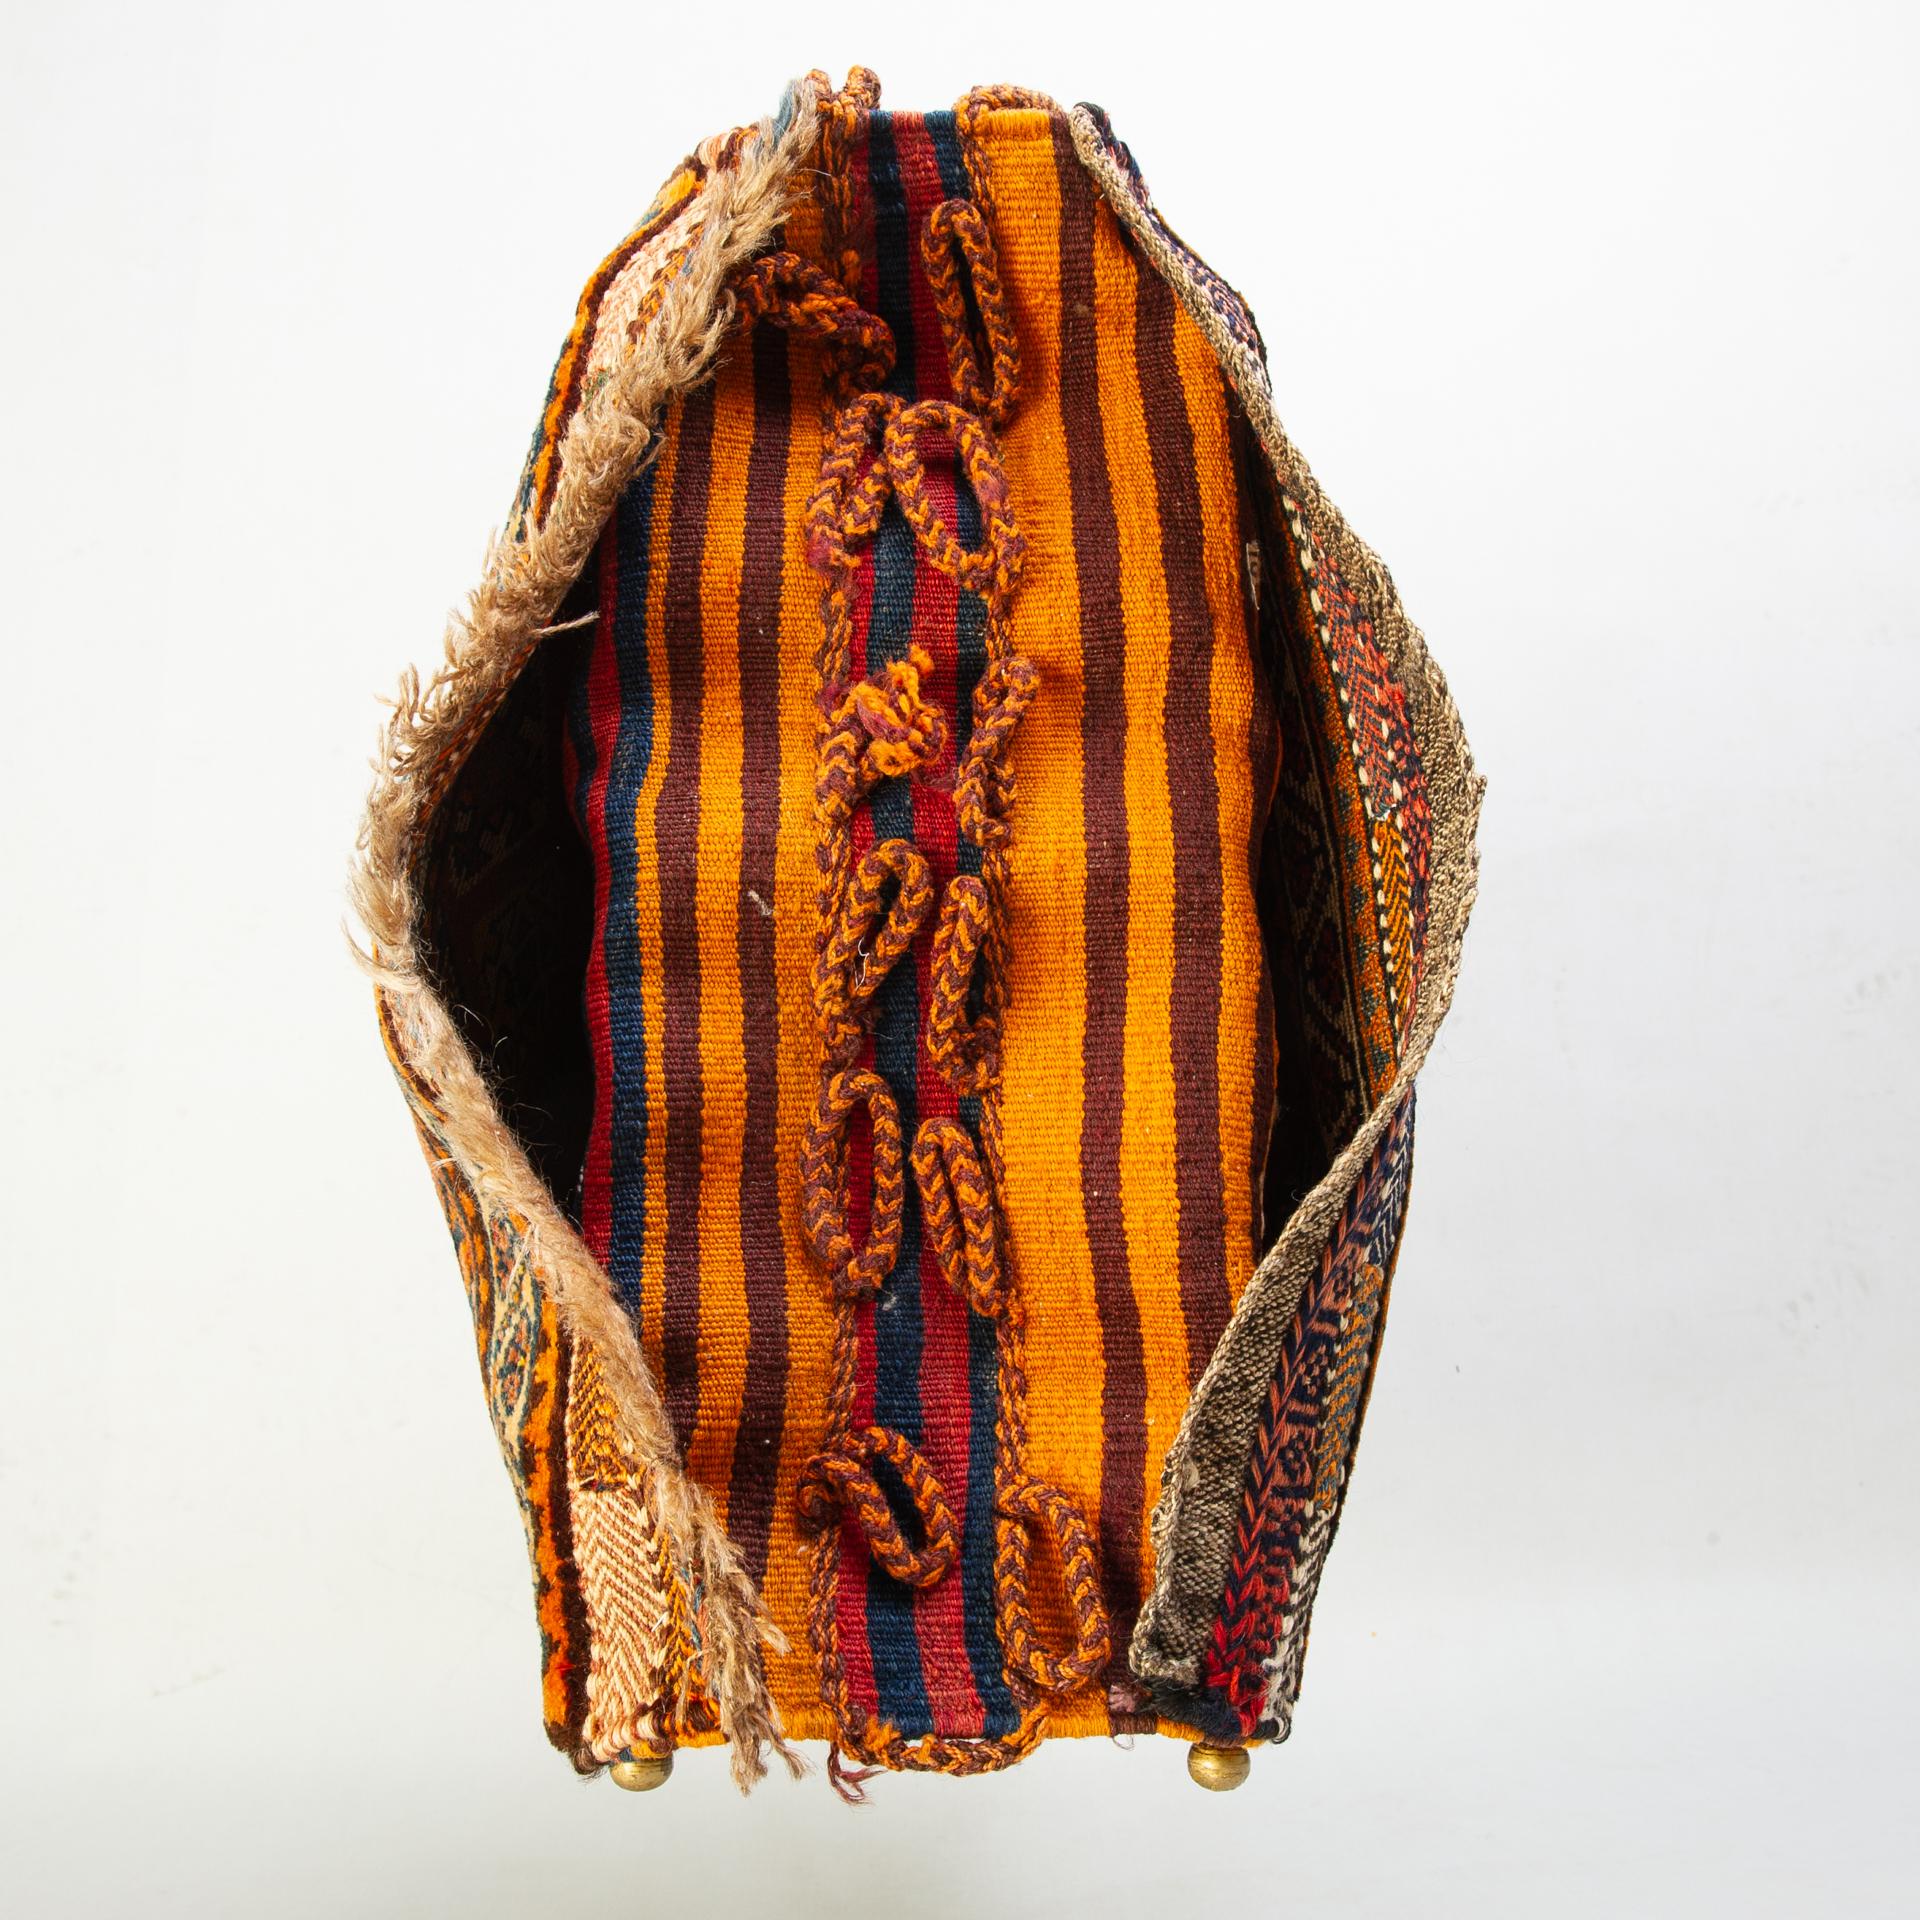 nr. 894 - Double oriental saddle bag, loom woven with wool dyed with vegetable substances.
It can be hung on a wall or placed on an easel and serve as a newspaper holder. With two paddings it becomes a pleasant pillow with backrest.
On request I can